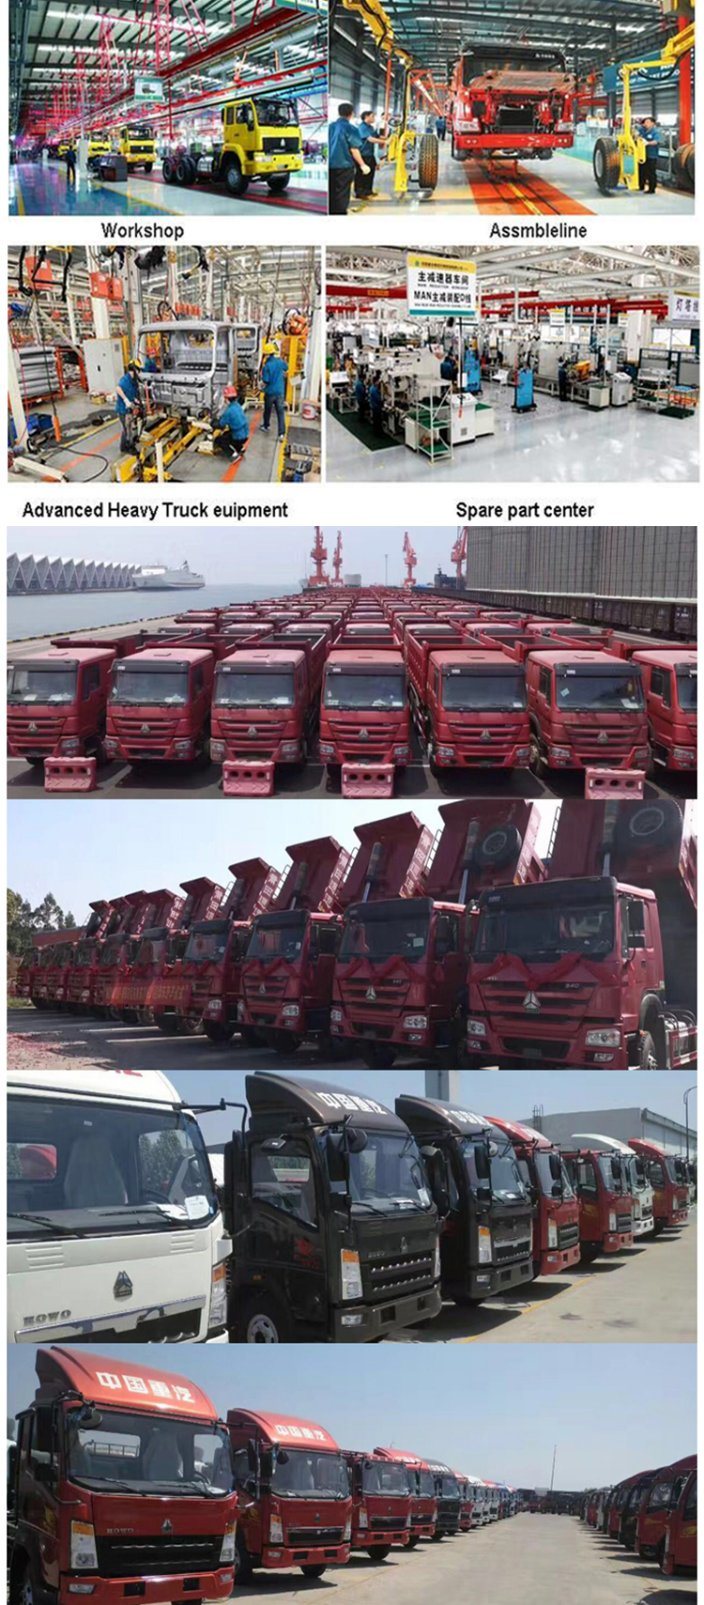 Sinotruk 6X4 HOWO 371HP A7 Heavy Dump Truck and Tipper Truck Used for Sale